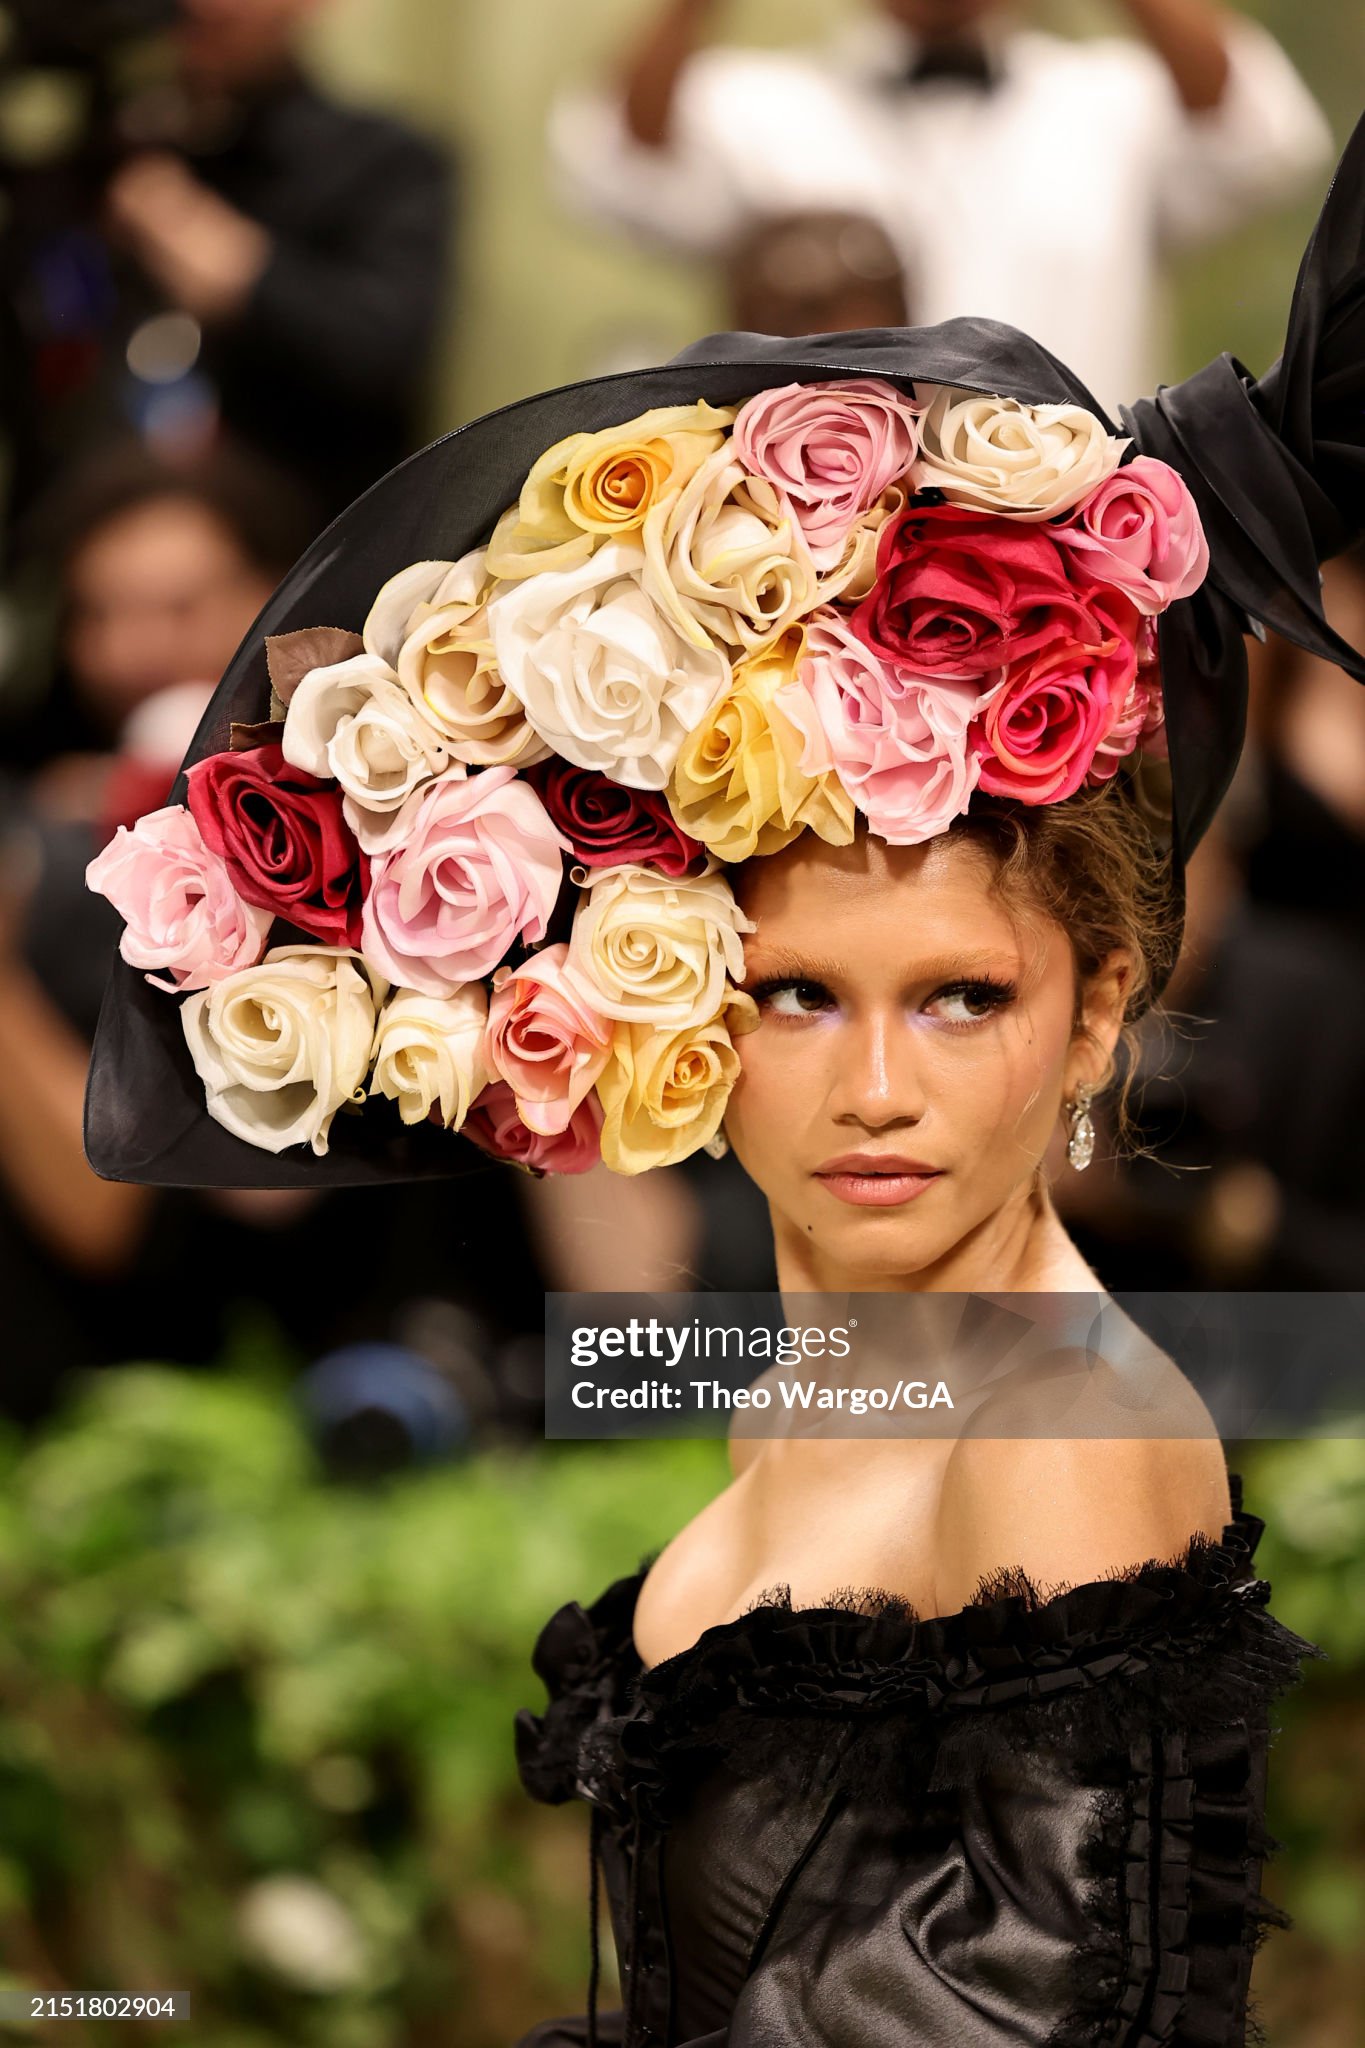 gettyimages-2151802904-2048x2048.jpg